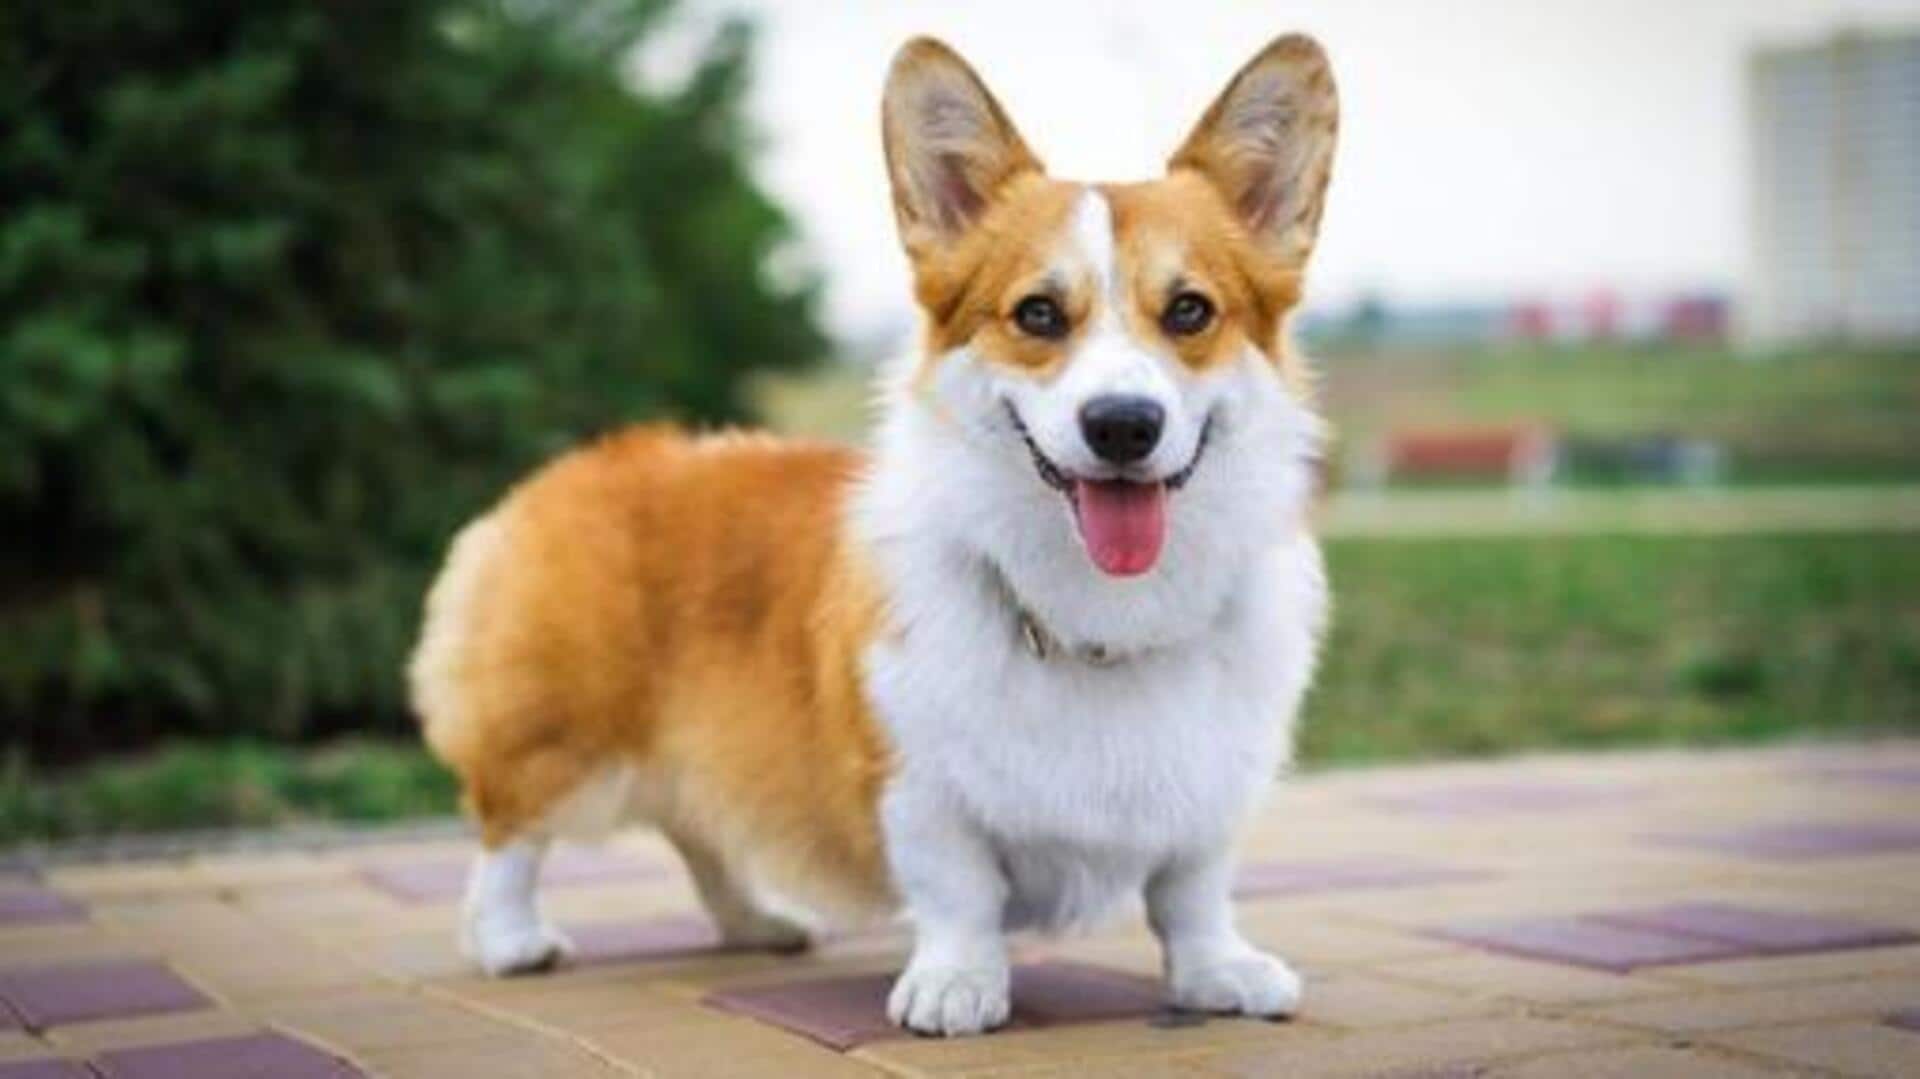 Keep your Corgi's joint health intact with these tips